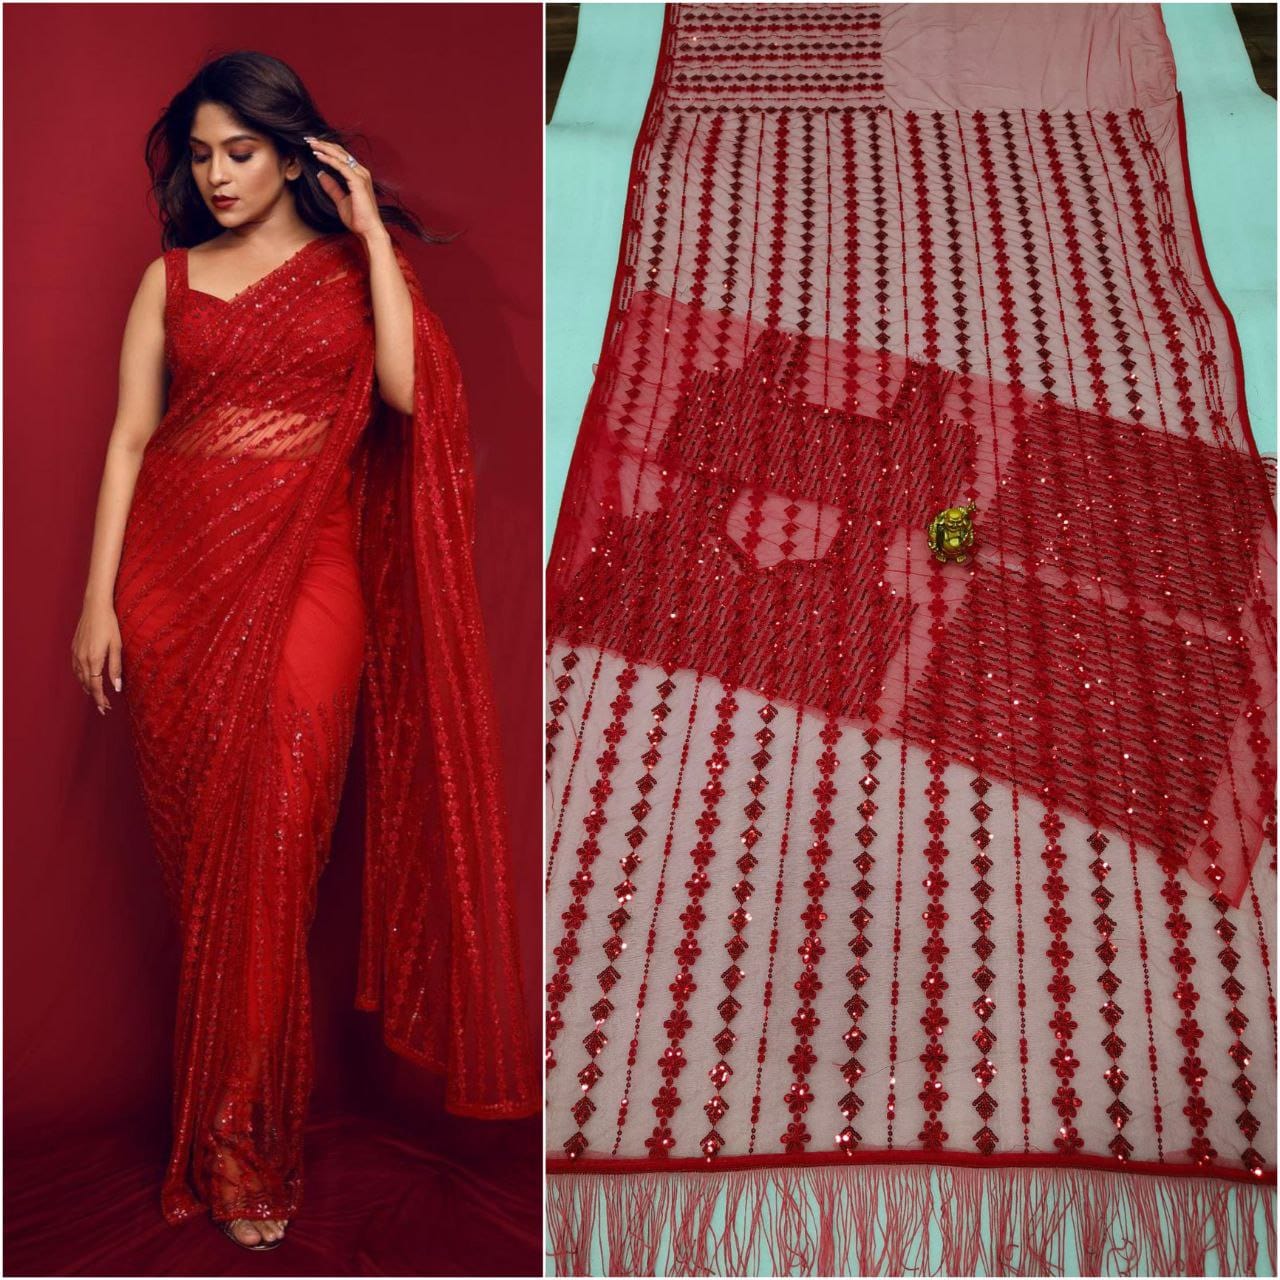 Manali designer saree Red New Bollywood Blockbuster 5MM Sequins and Multy Embroidery Net Saree with Embroidered Net Blouse